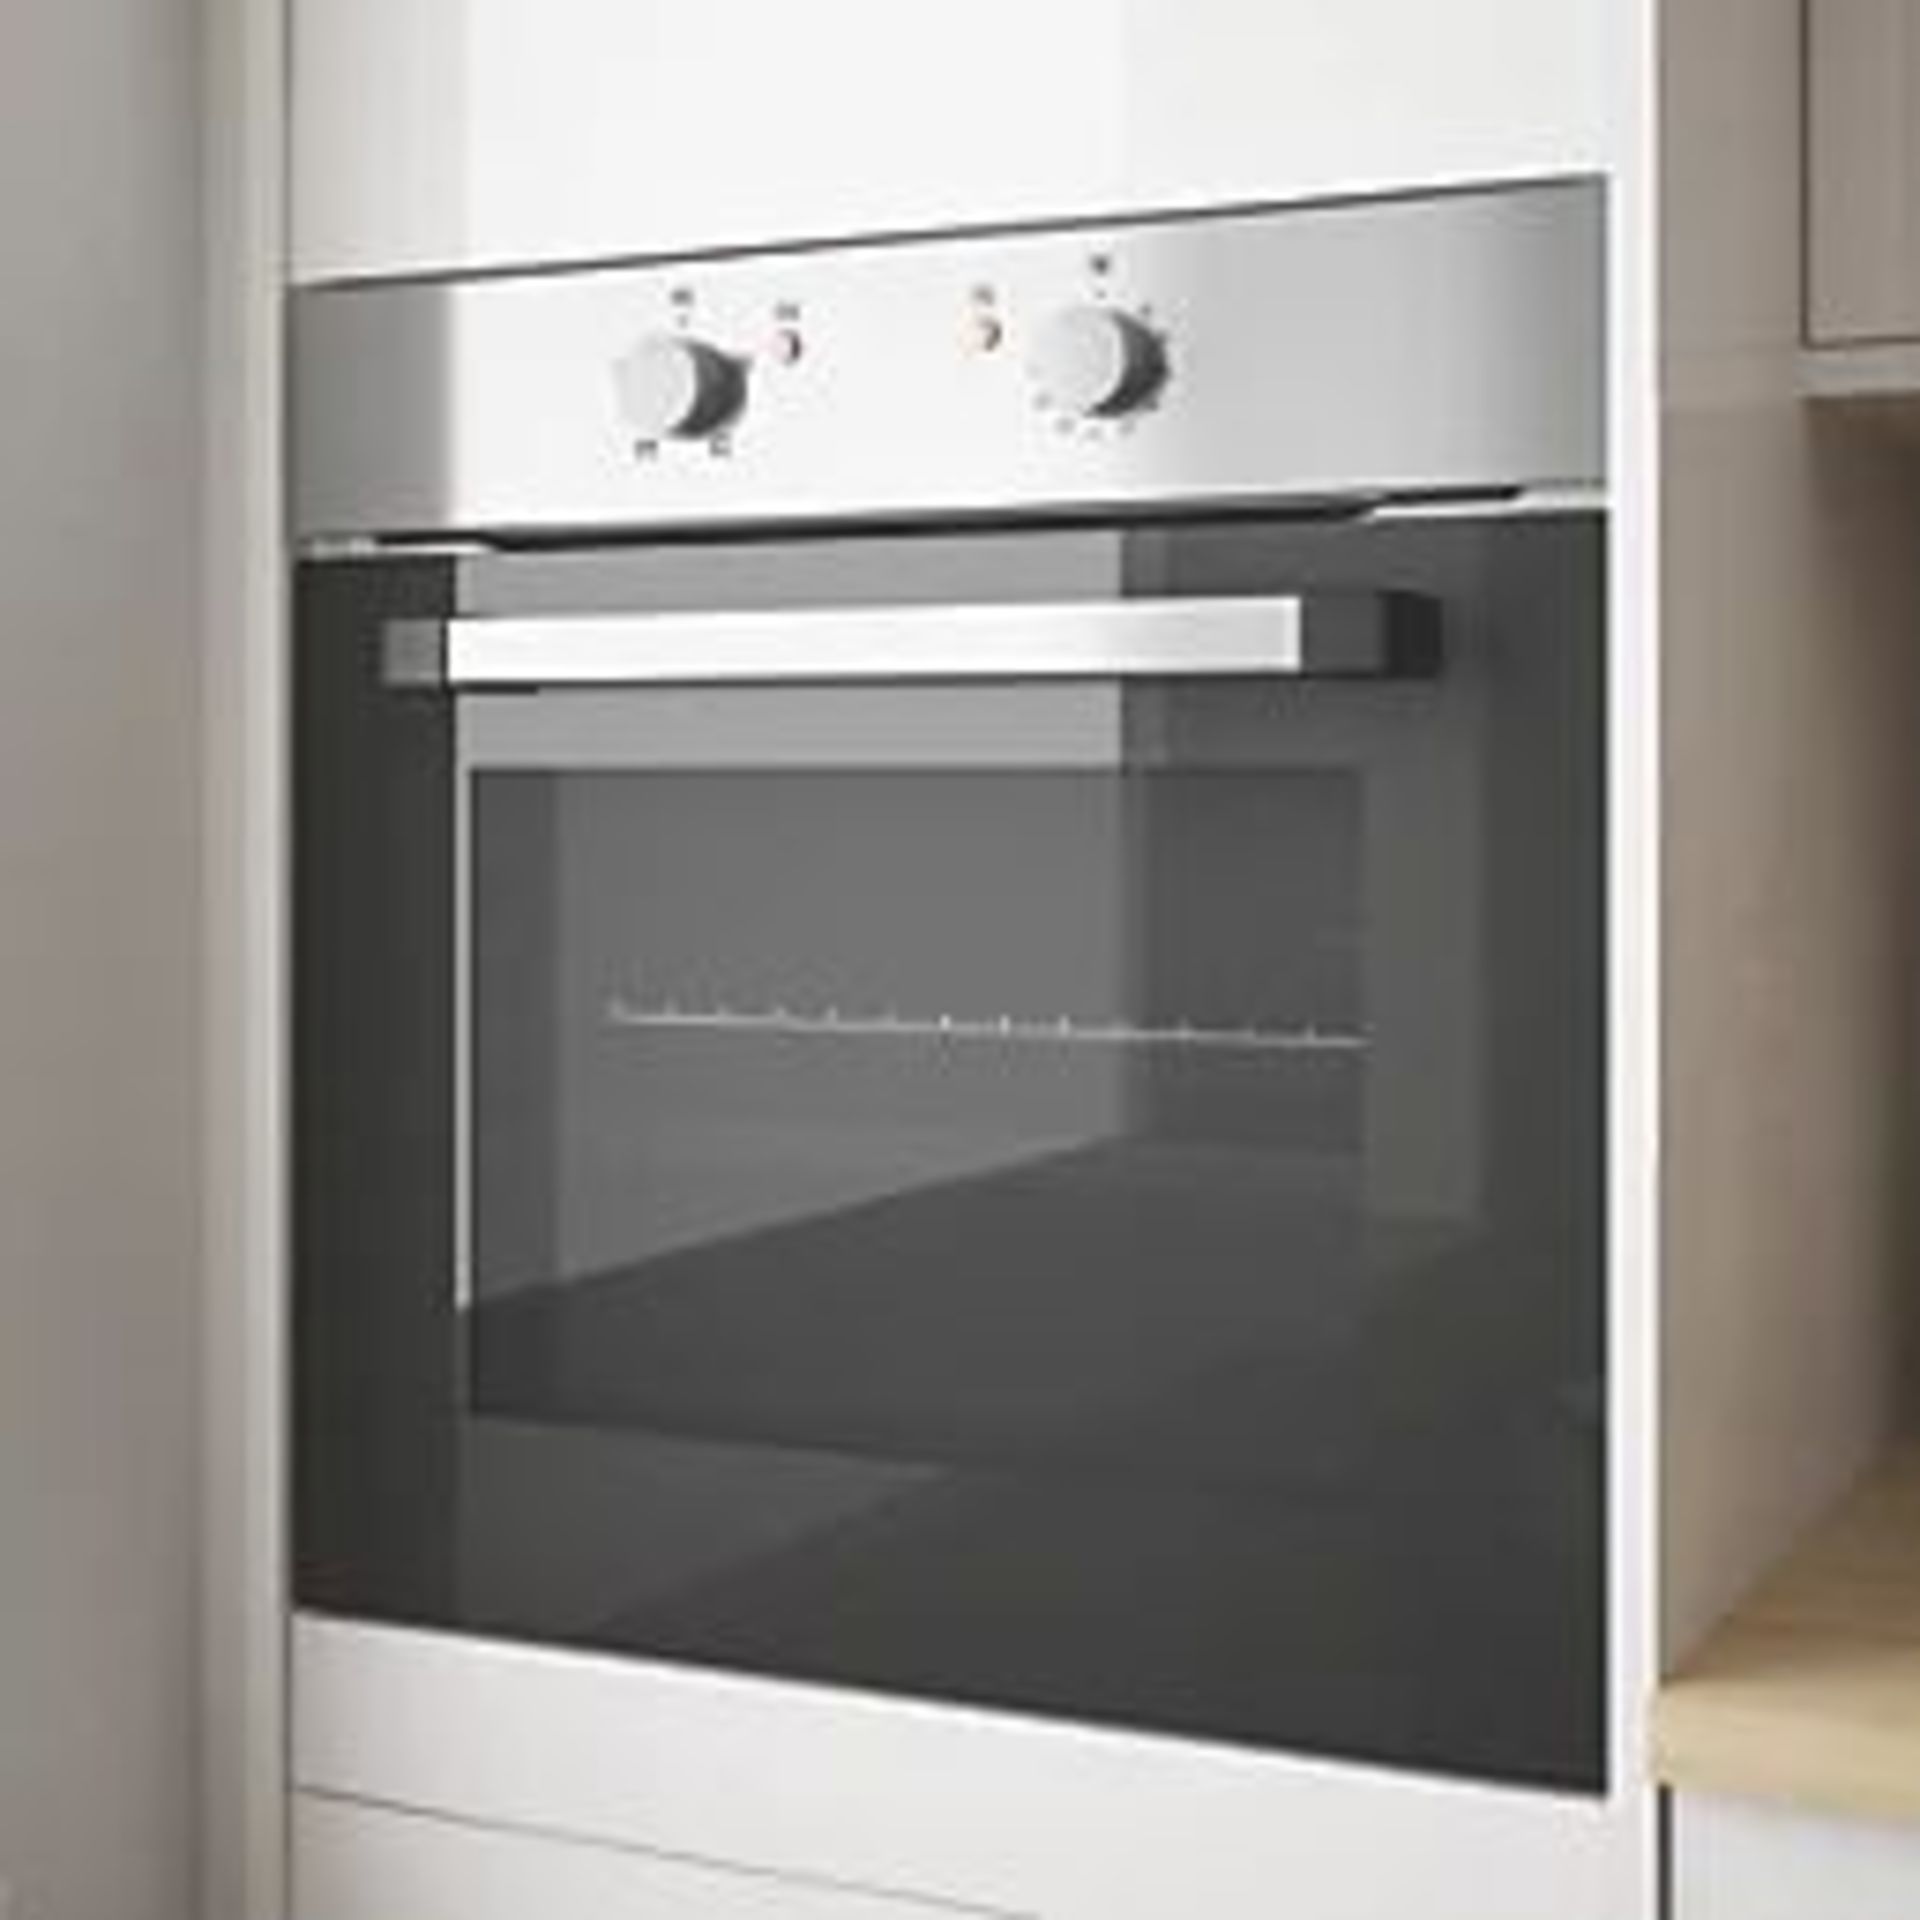 COOKE & LEWIS BUILT- IN SINGLE ELECTRIC OVEN STAINLESS STEEL 595MM X 595MM. - R14.13. Conventional